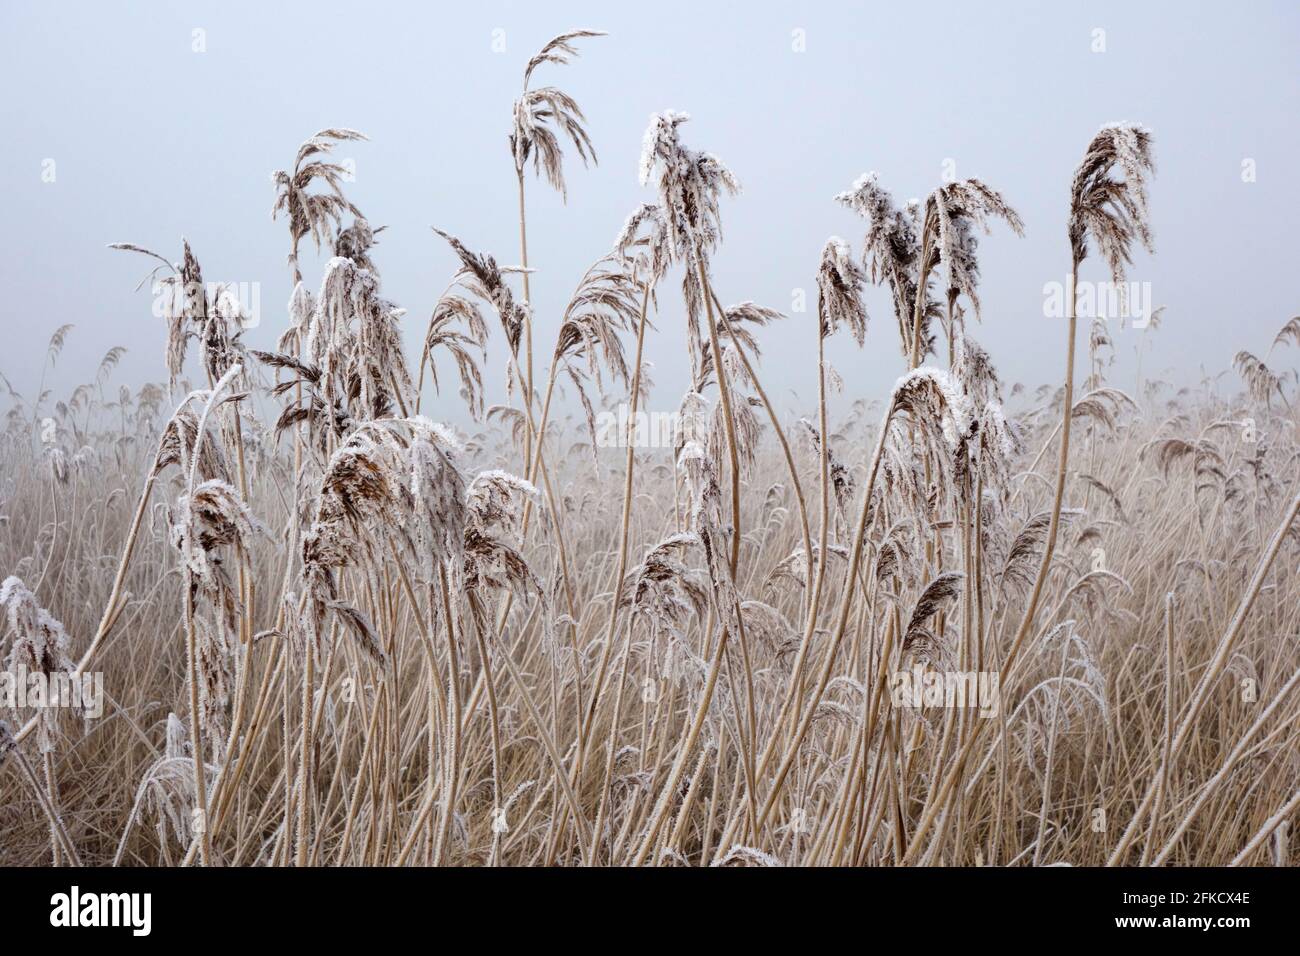 Reed bed on a frosty, foggy morning Stock Photo